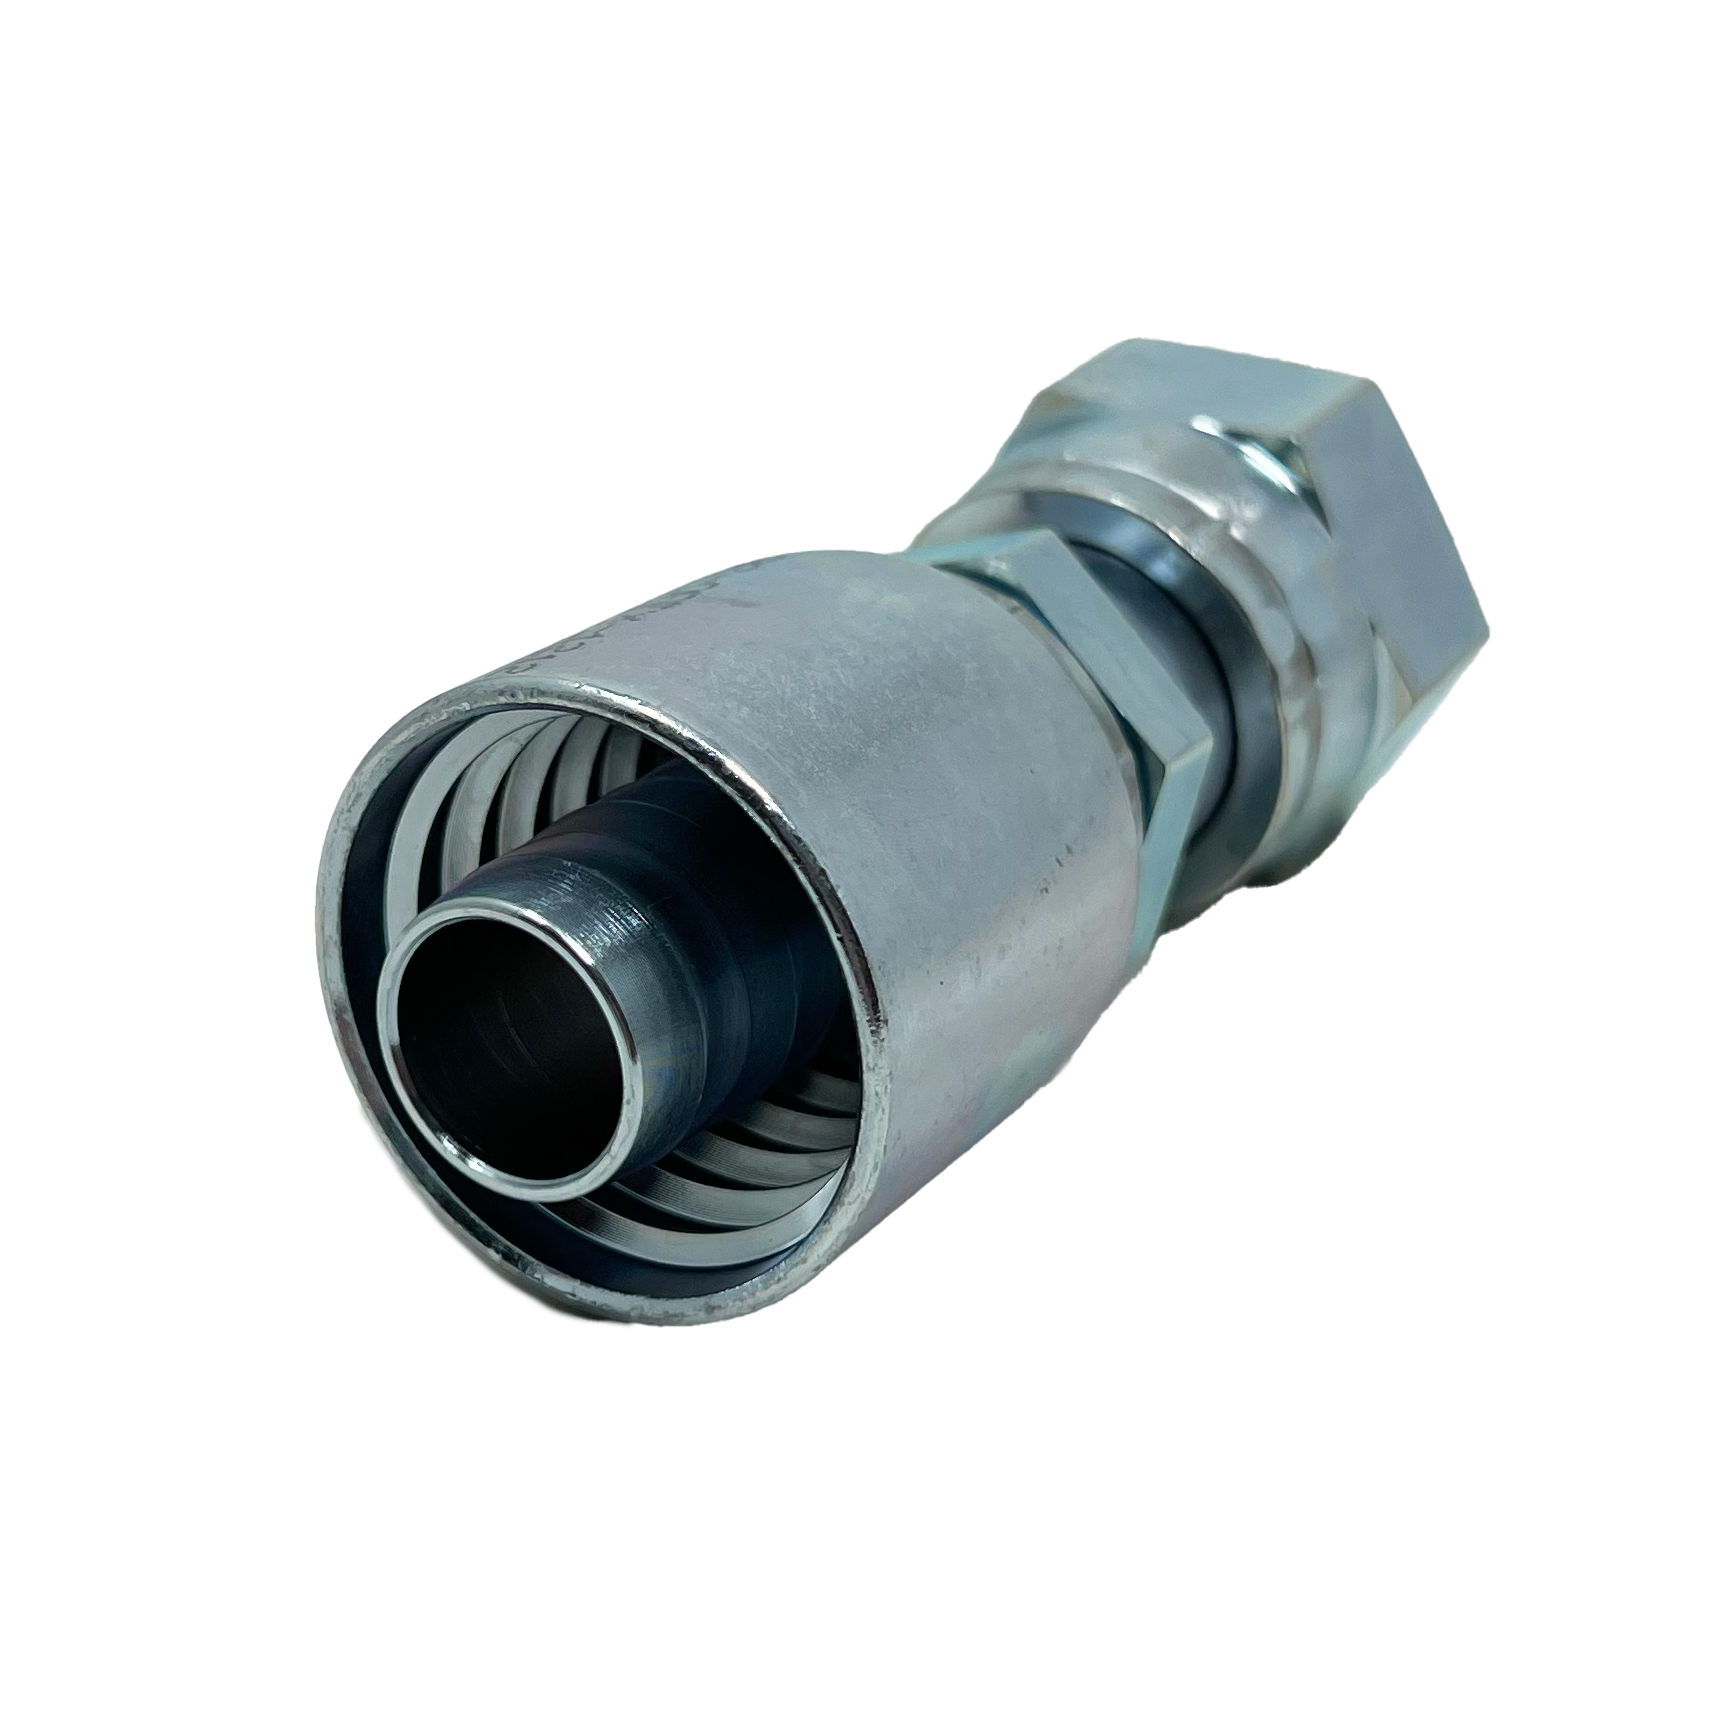 B2-OFFX-1210: Continental Hose Fitting, 0.75 (3/4") Hose ID x 1-14 Female ORFS, Straight Swivel Connection